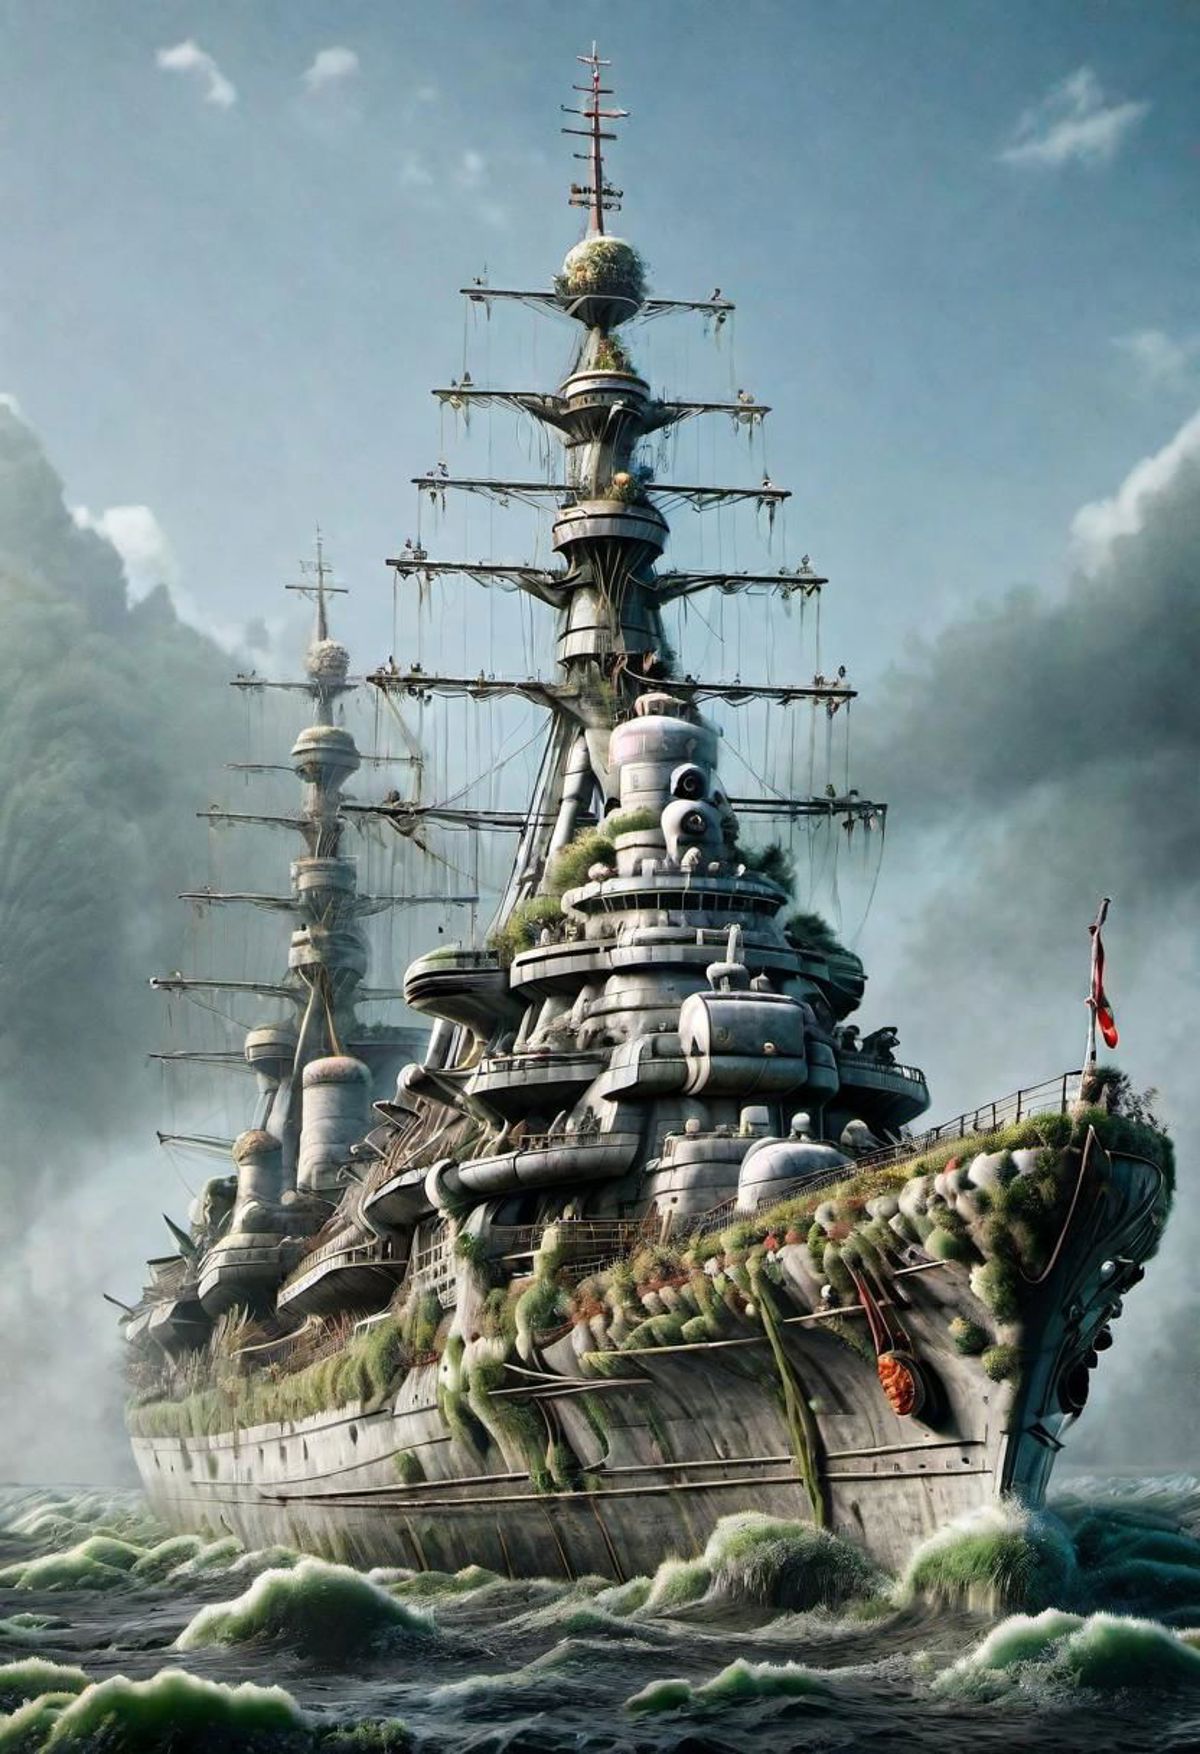 A large ship with greenery growing on it, sailing in the ocean.